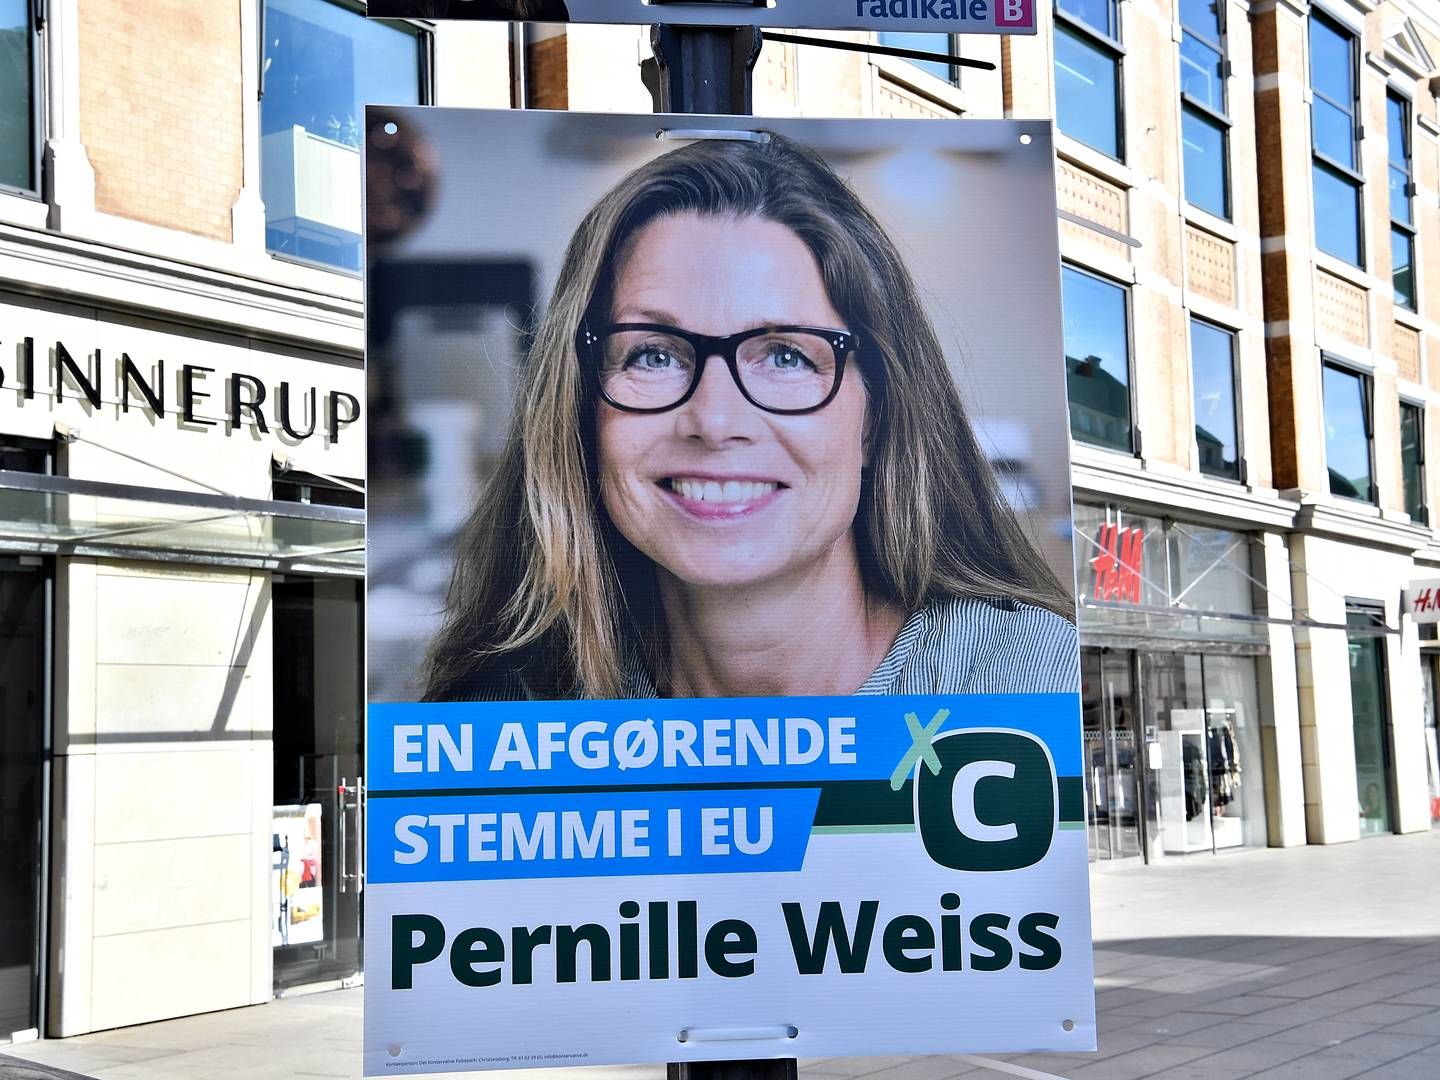 Danish campaign poster for Pernille Weiss | Foto: Ernst van Norde